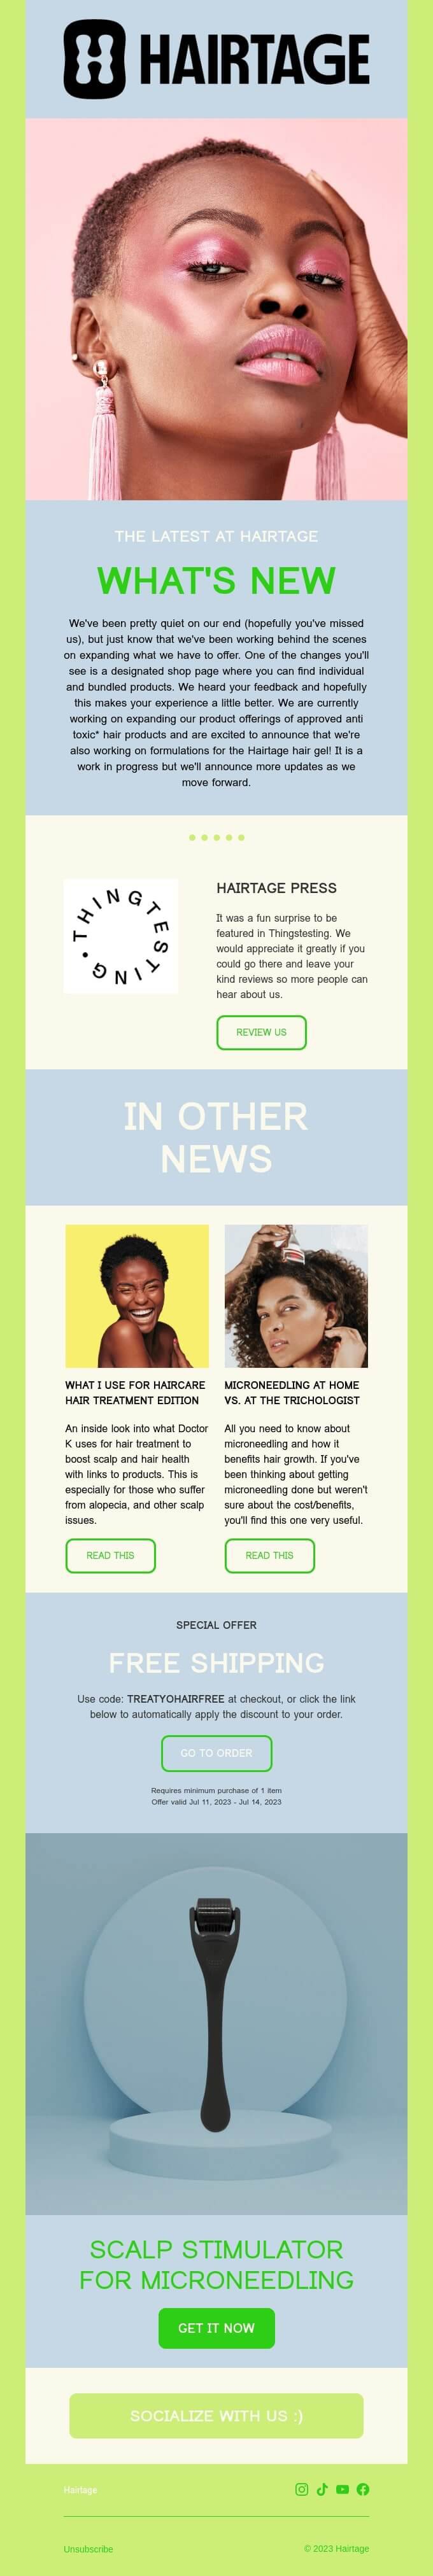 hairtage-newsletter-example